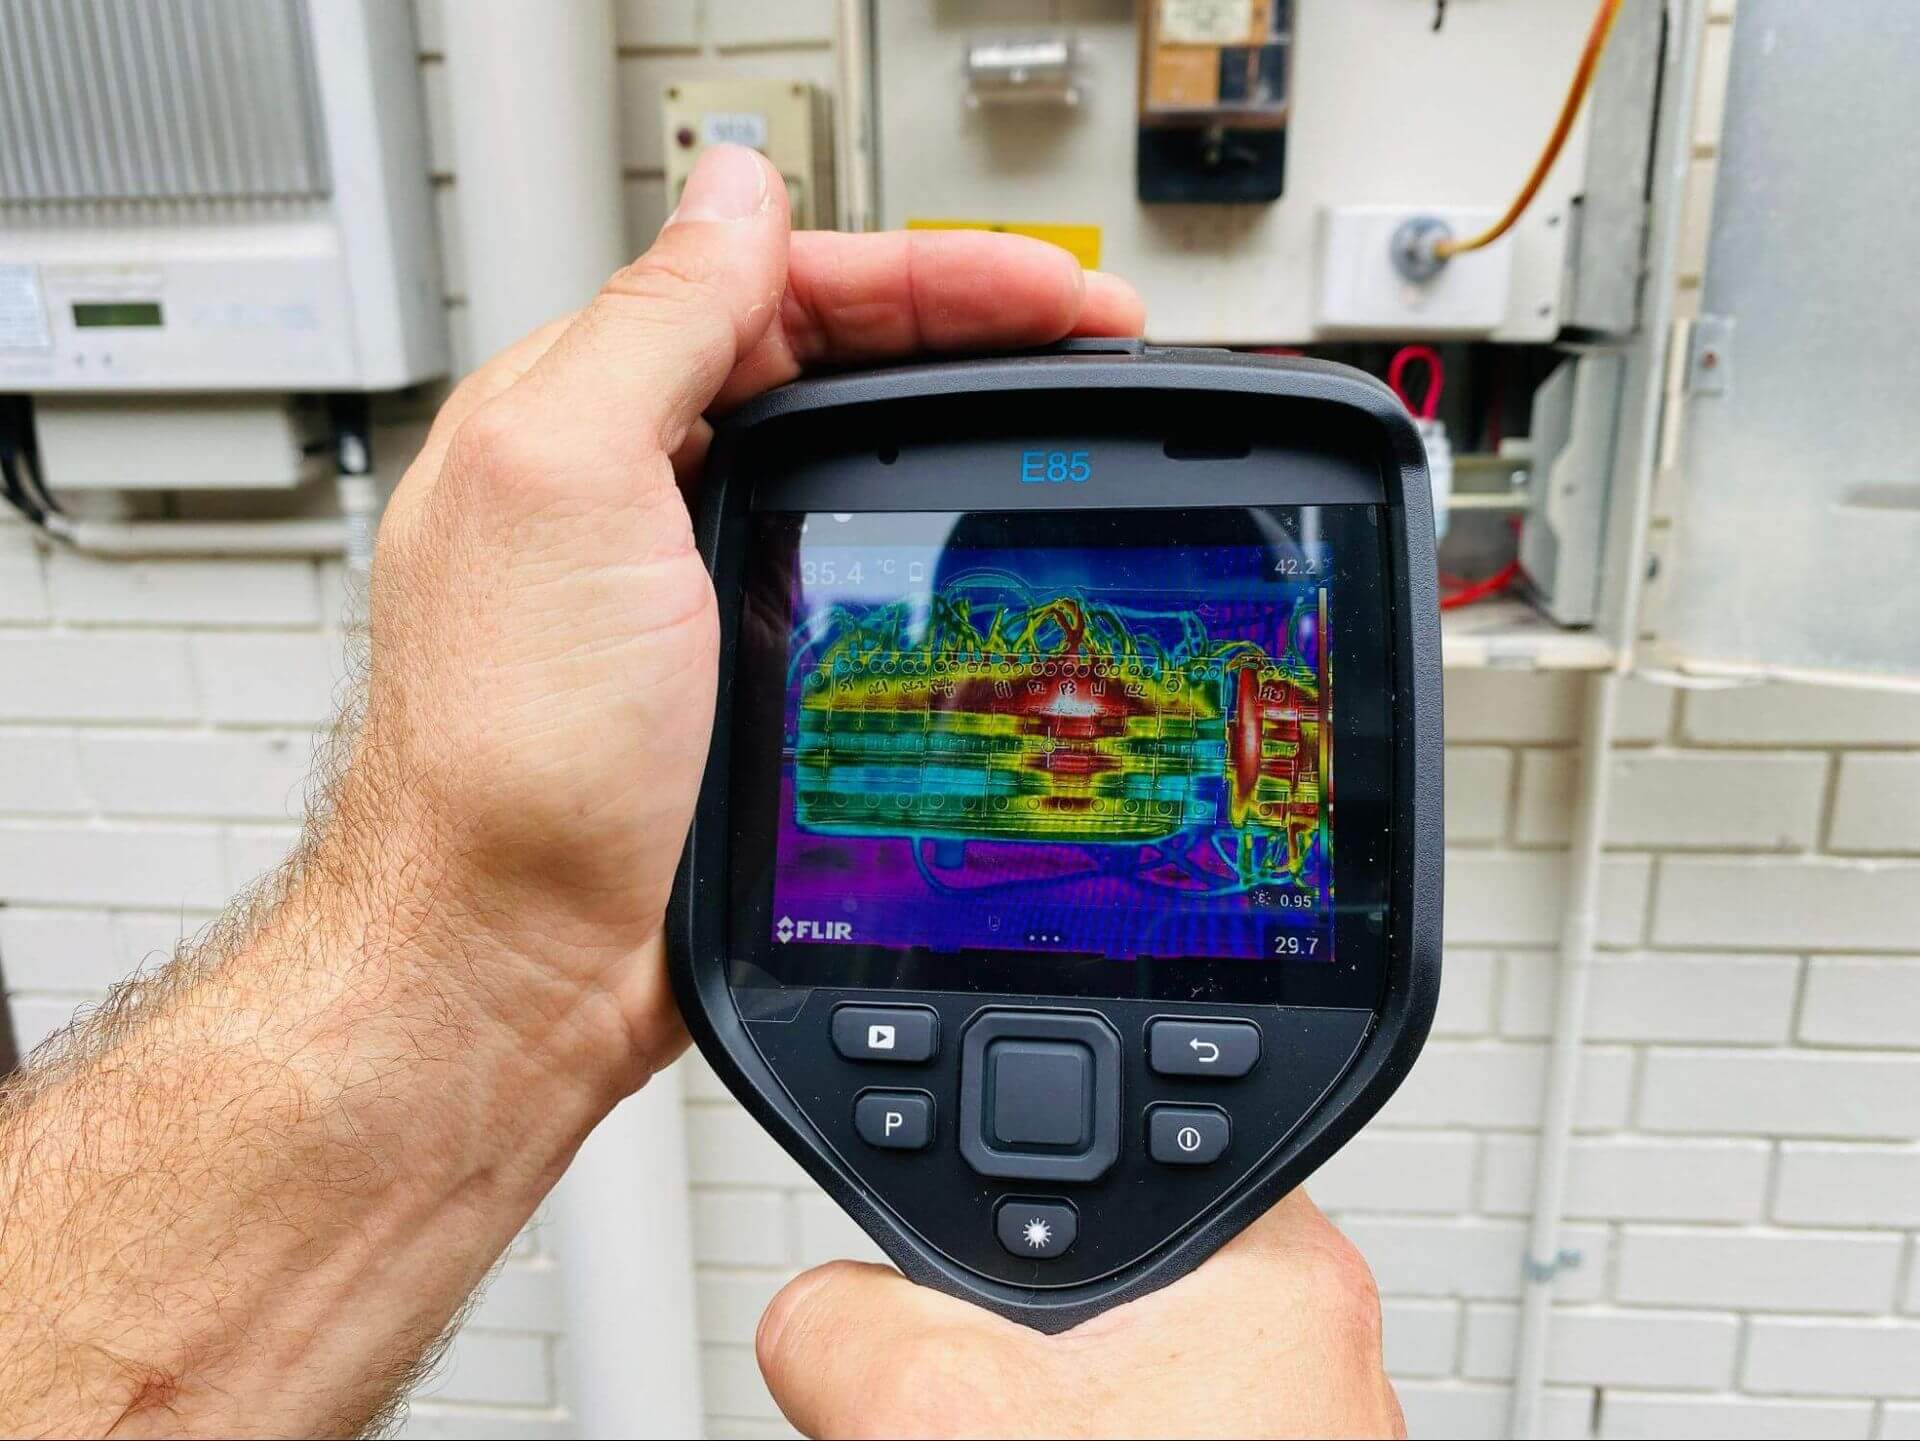 Switchboard Maintenance and Thermal Imaging provided by specialist electricians throughout Brisbane for the Body Corporate and Strata Community